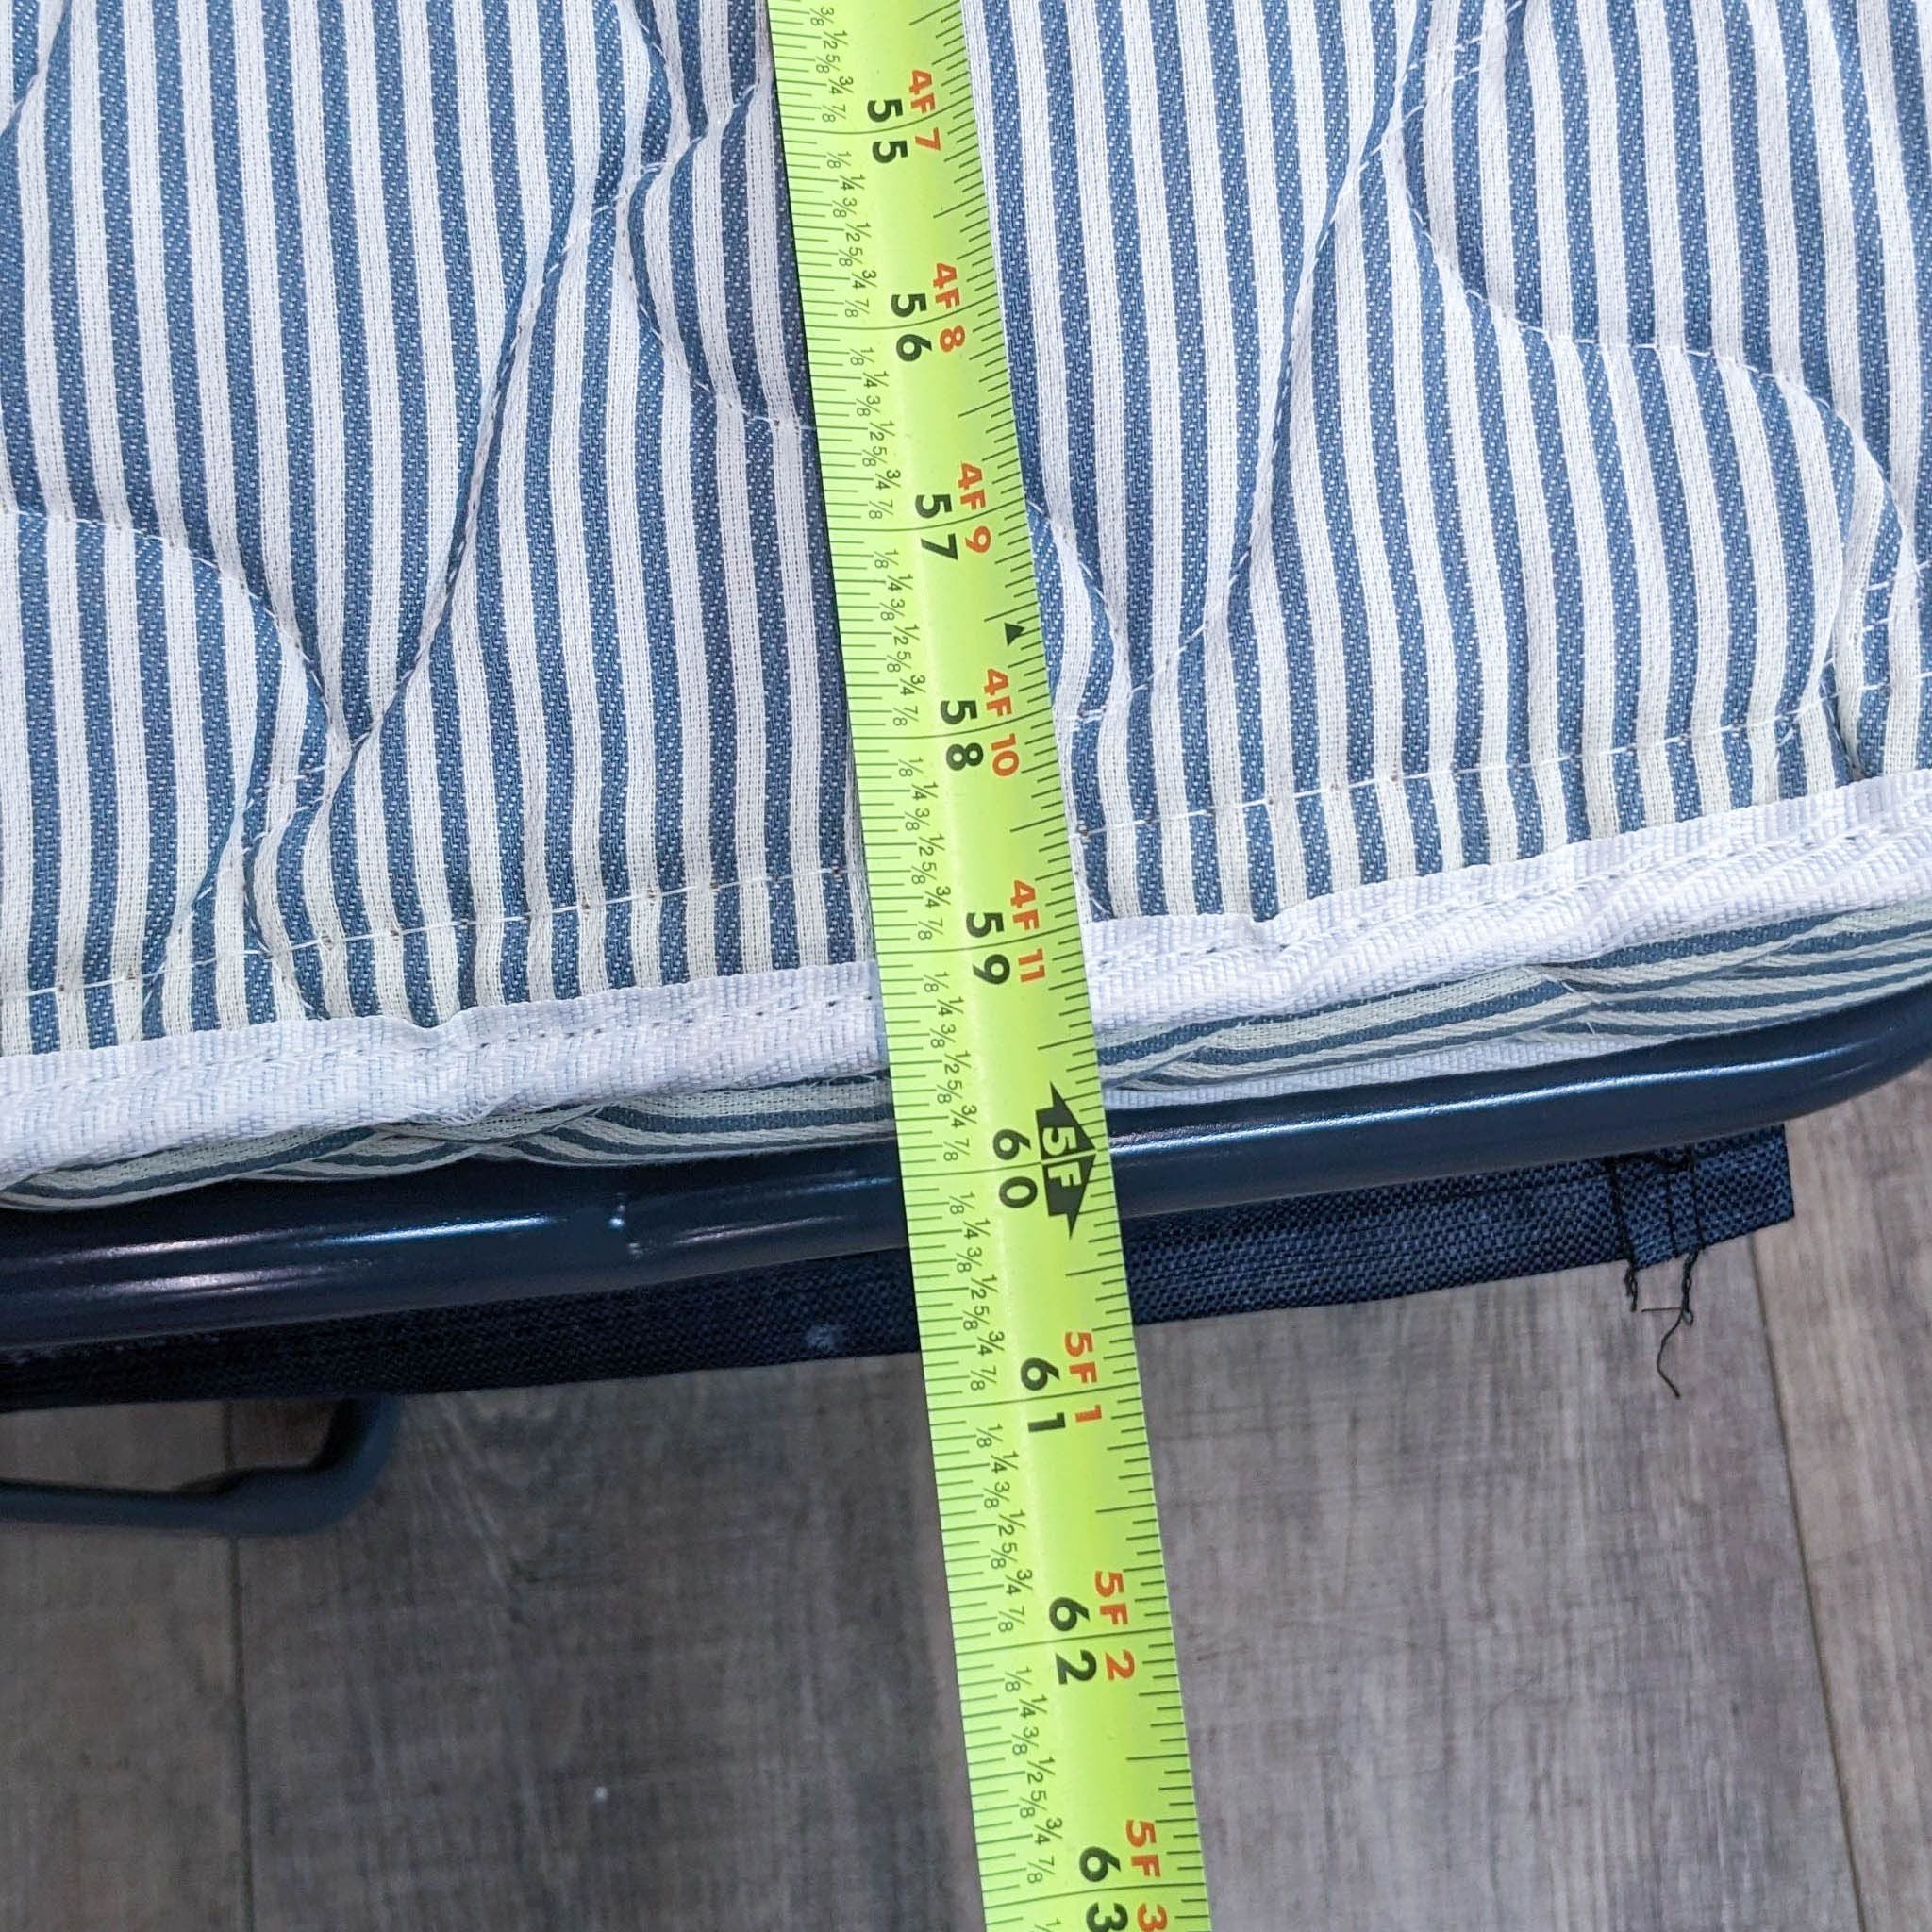 Measuring tape showing the thickness of Crate & Barrel sleeper sofa's mattress with striped cover.